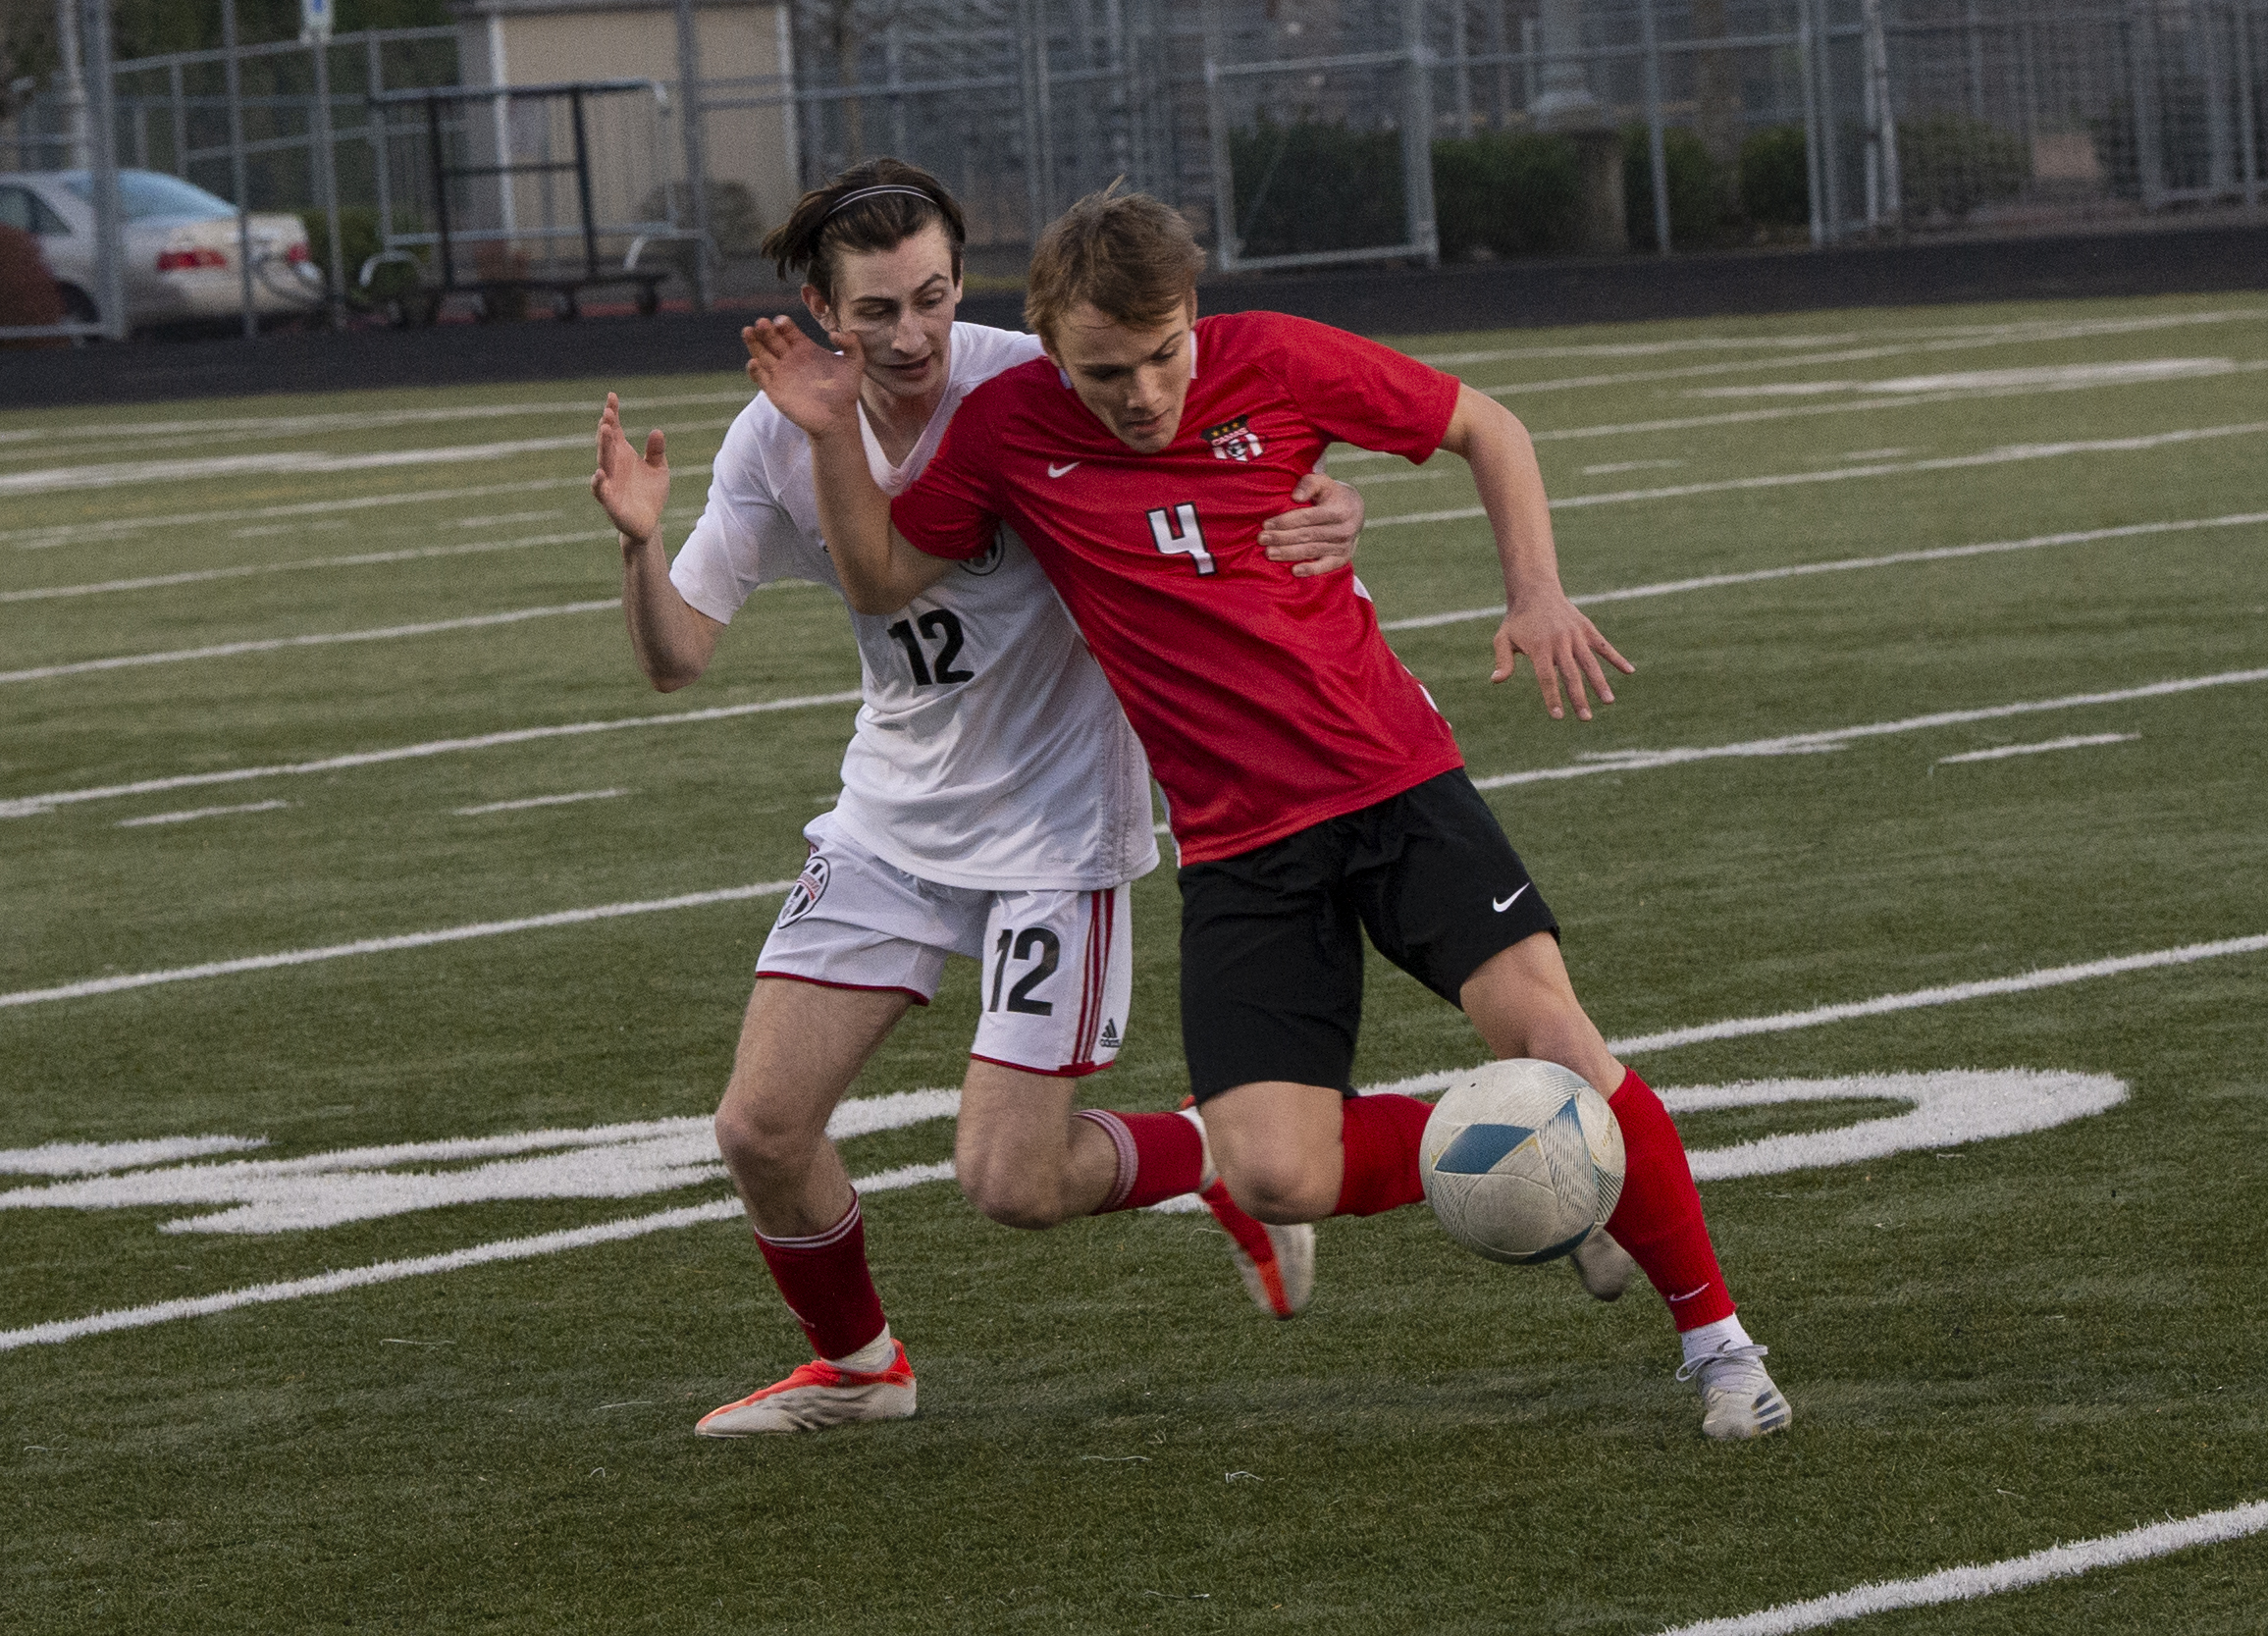 Union's Sam Wilson (12) and Camas' Kieran Halsinger (4) battle for possession of the ball during Union's 1-0 win over Camas on Thursday, March 22, 2022.